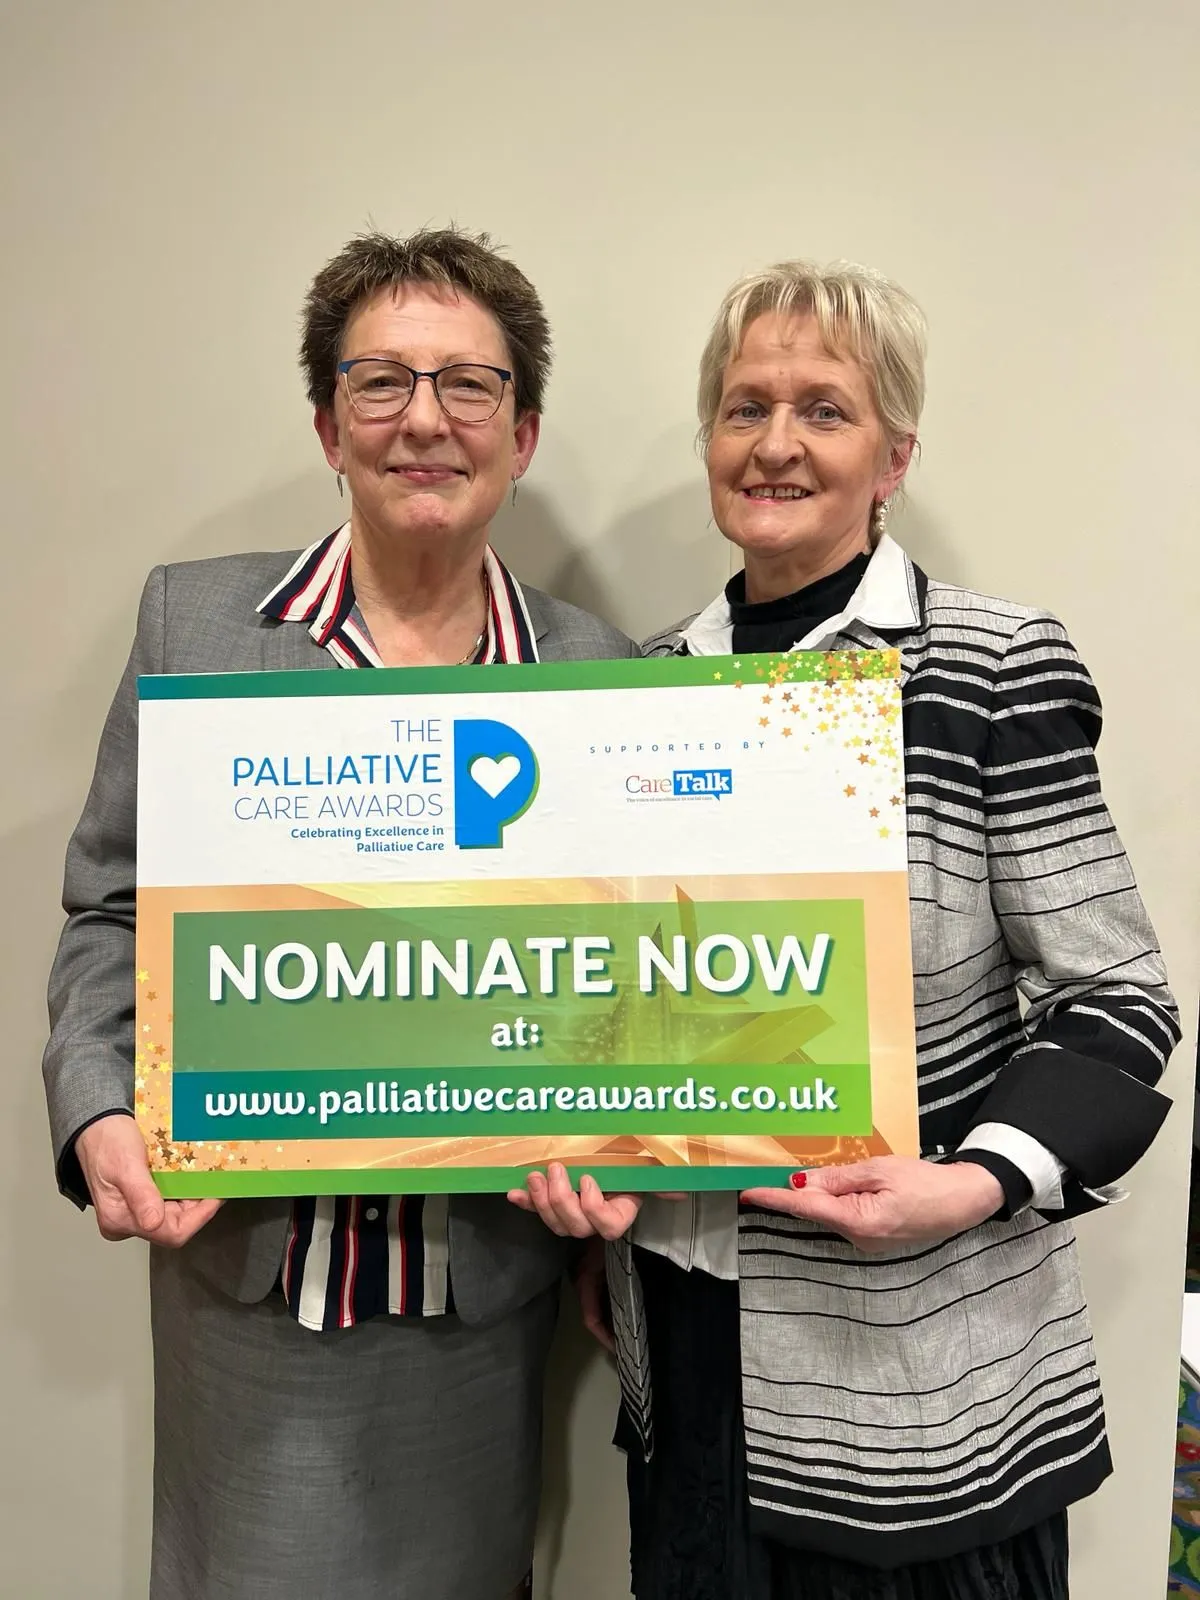 Palliative and End of Life Care Awards